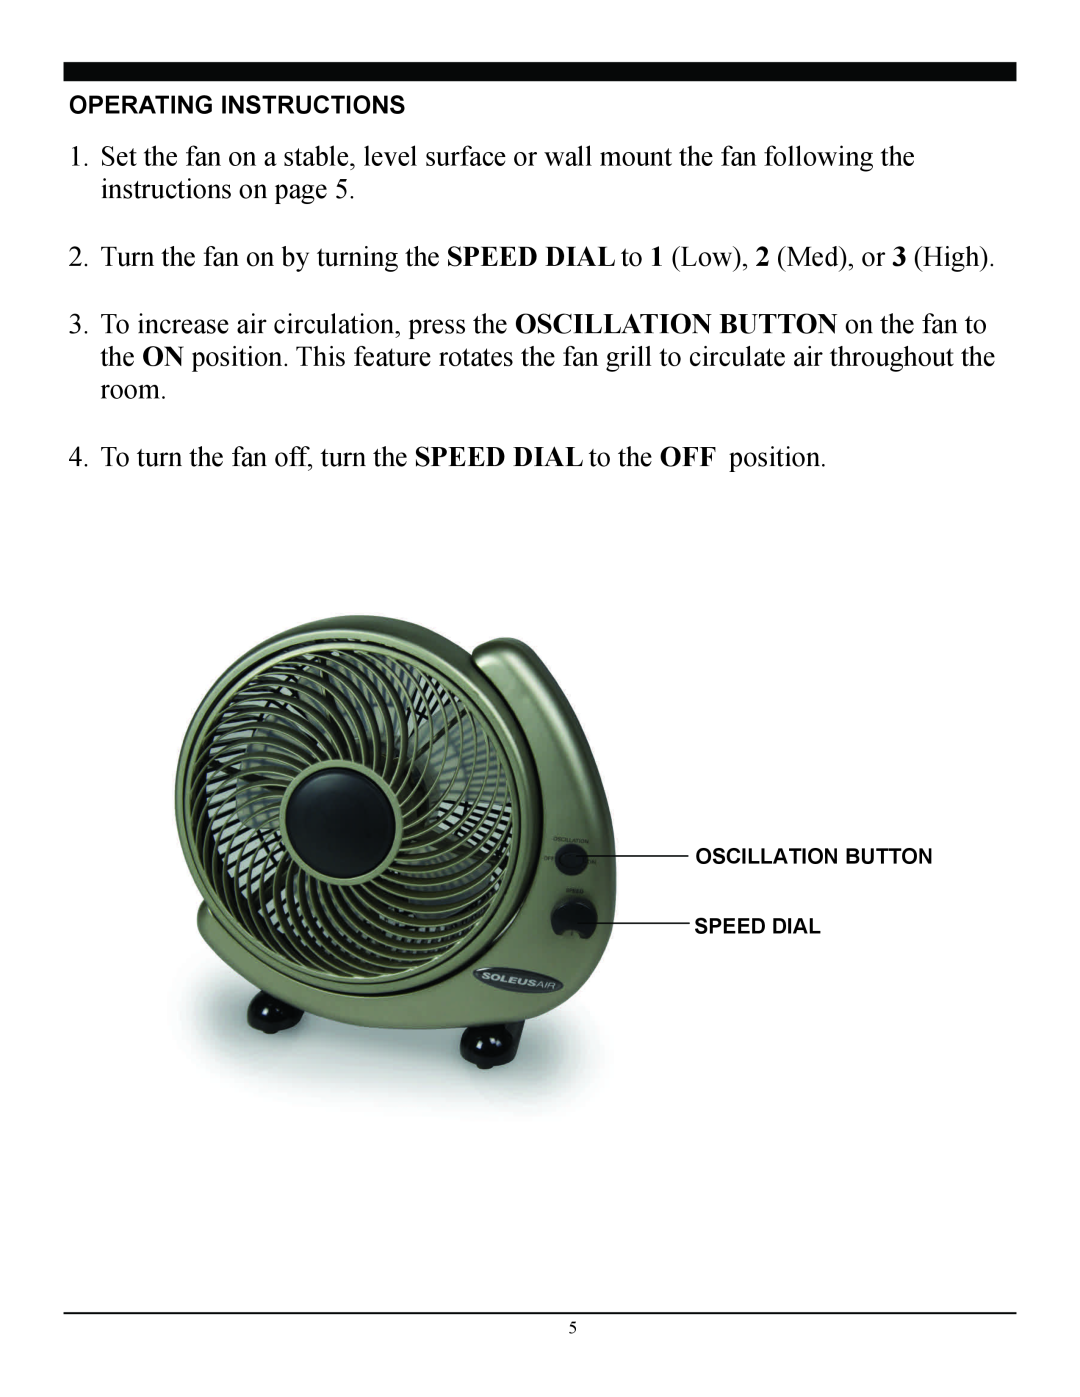 Soleus Air ft2-25-03 operating instructions Operating Instructions, Oscillation Button Speed Dial 